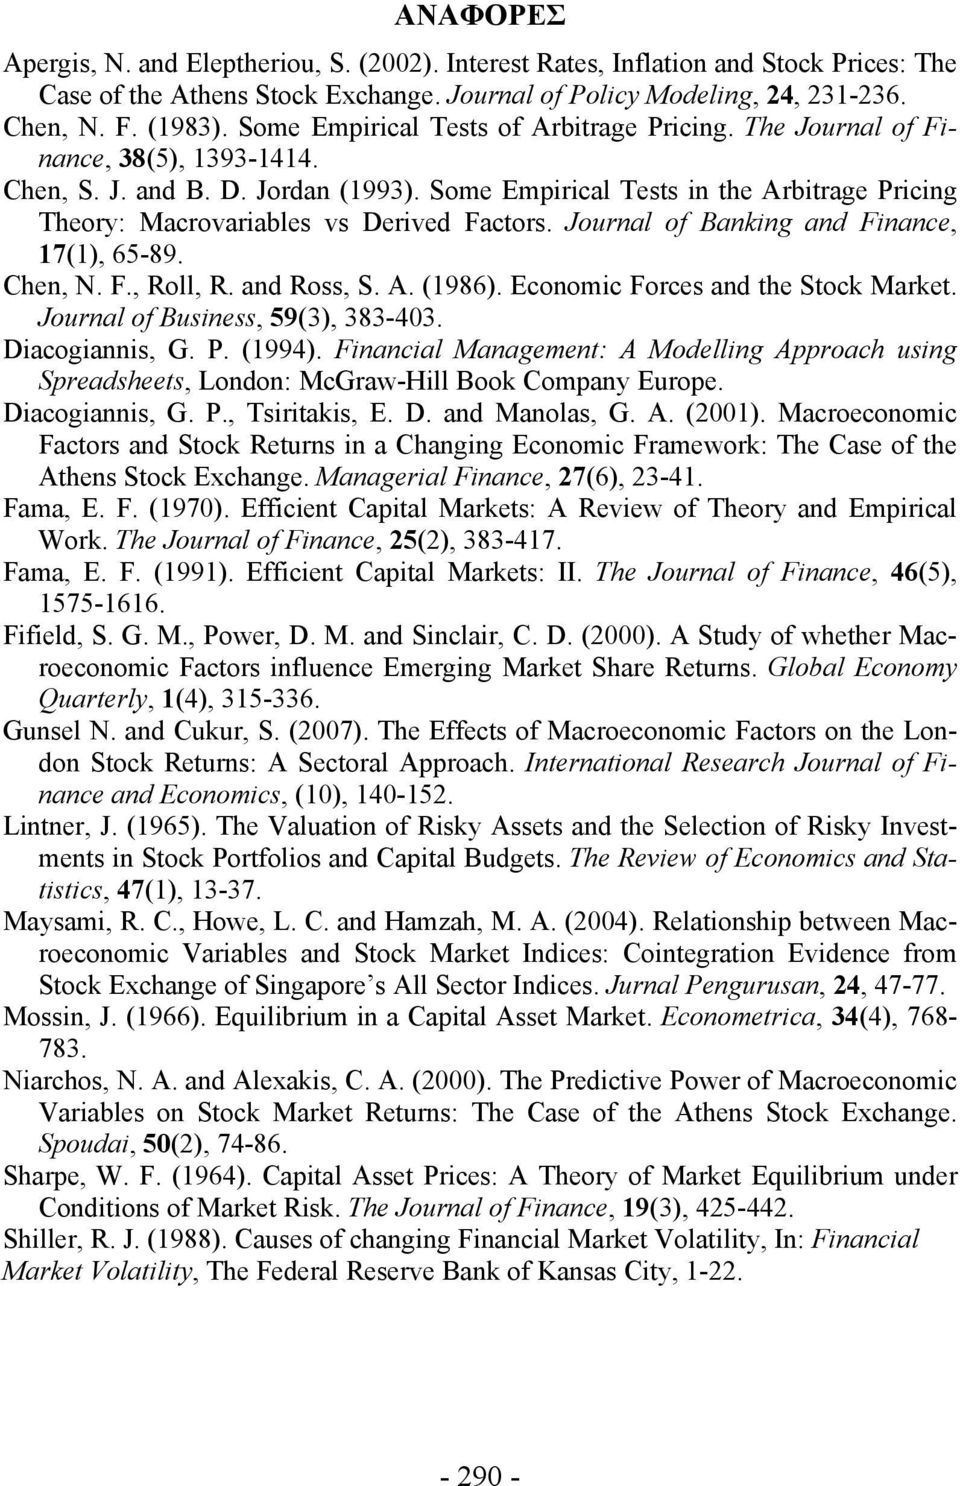 Some Empirical Tests in the Arbitrage Pricing Theory: Macrovariables vs Derived Factors. Journal of Banking and Finance, 17(1), 65-89. Chen, N. F., Roll, R. and Ross, S. A. (1986).